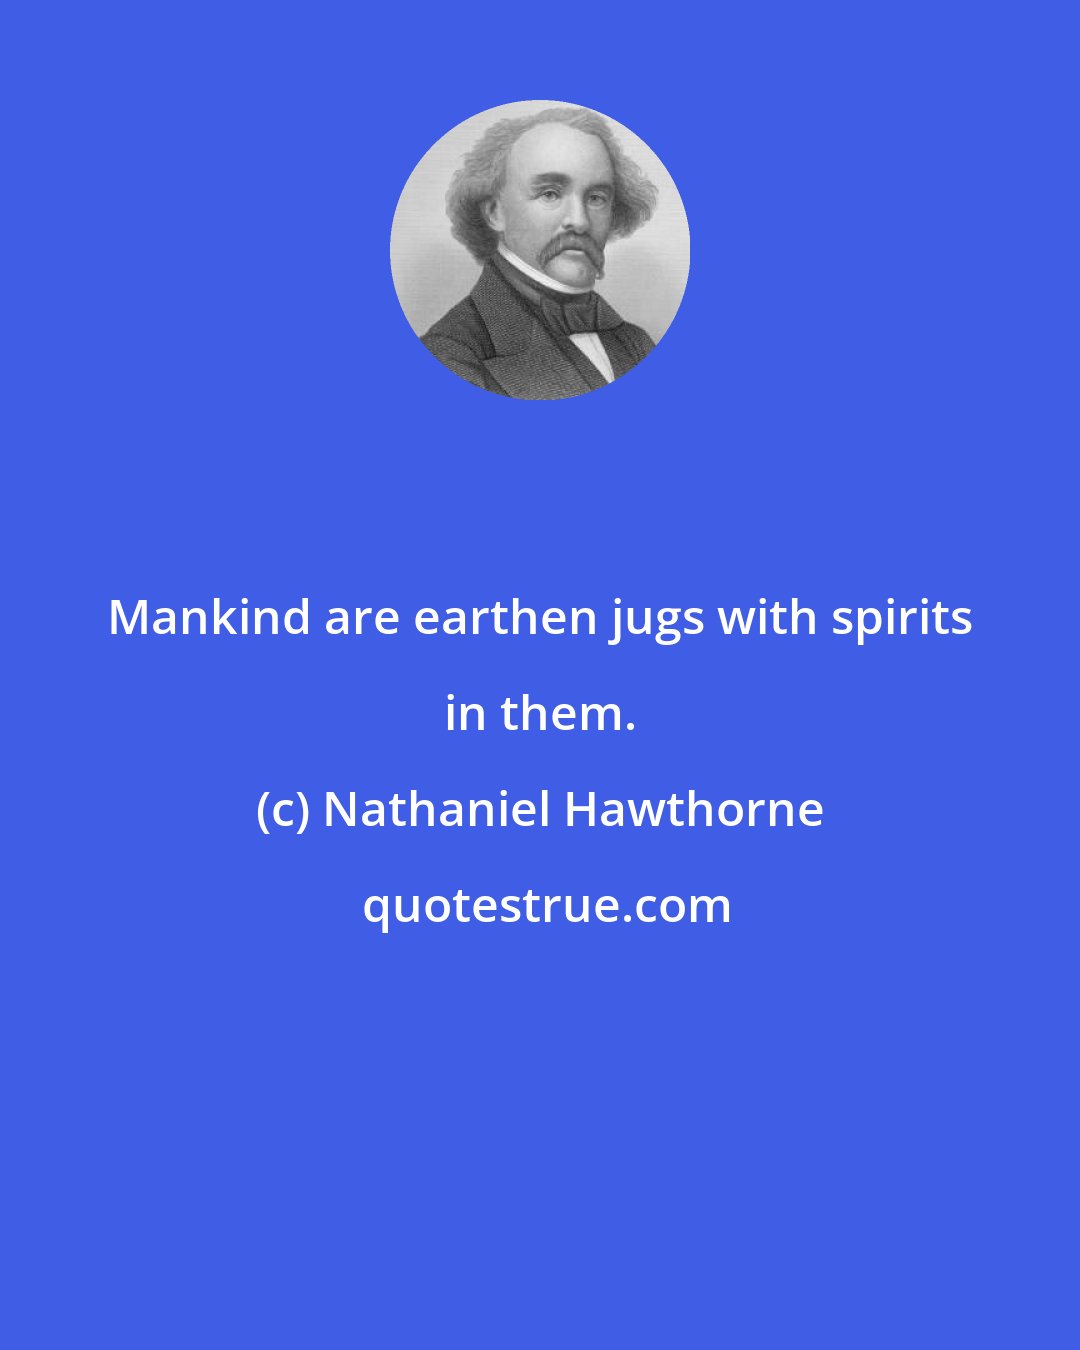 Nathaniel Hawthorne: Mankind are earthen jugs with spirits in them.